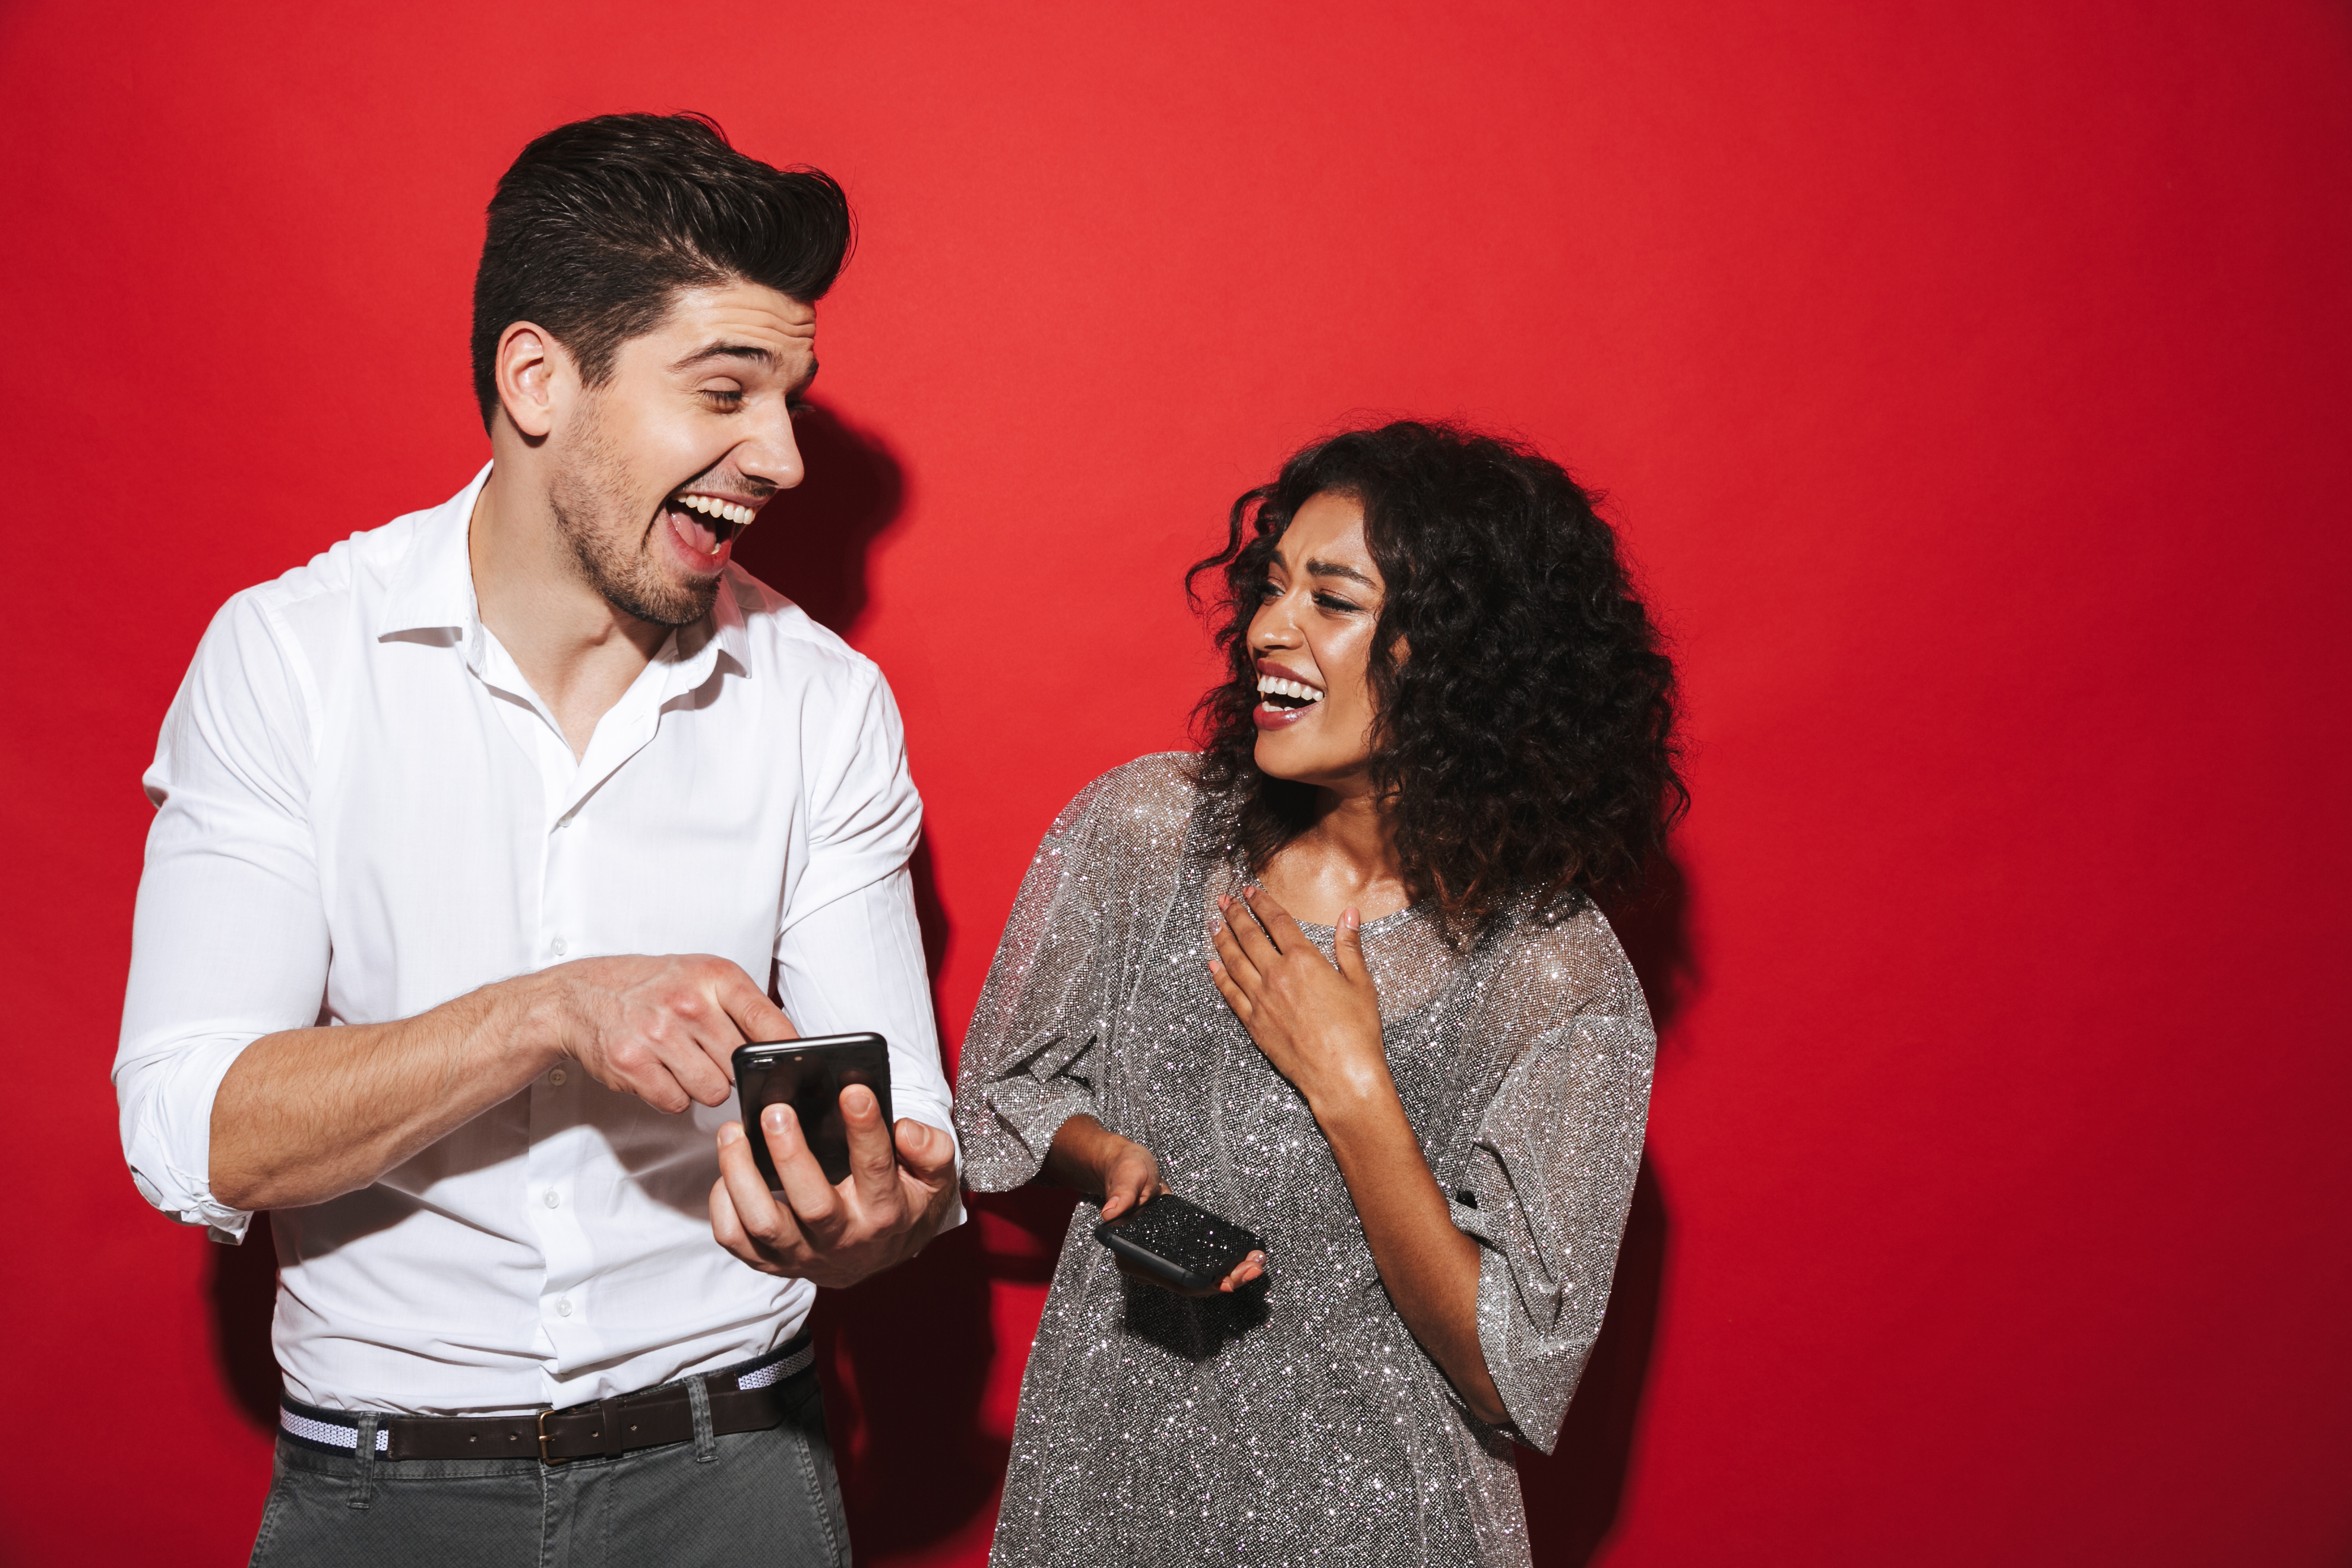 A man and woman laugh together as they point at their mobile phones in front of a red background.